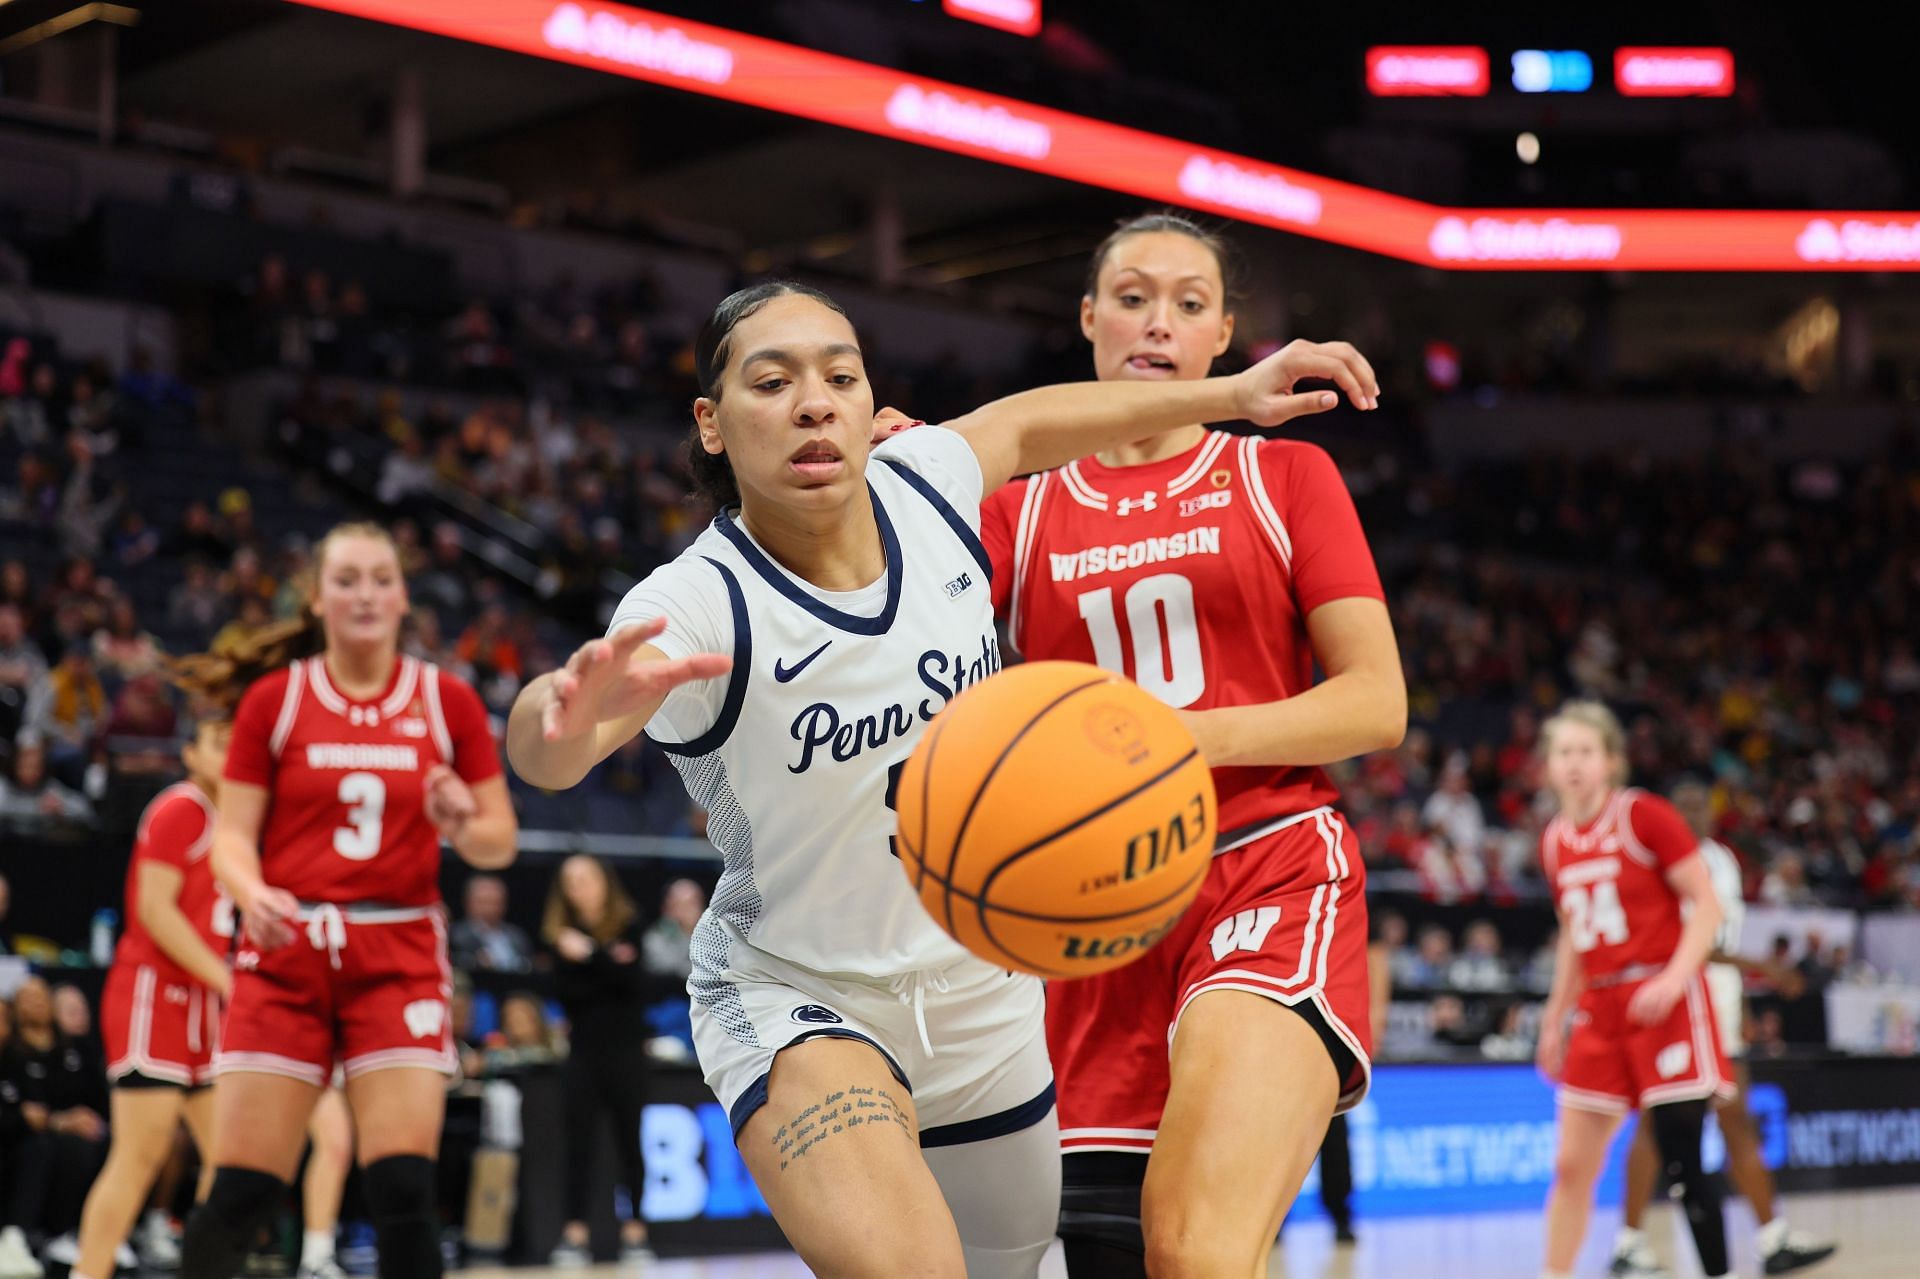 Leilani Kapinus of the Penn State Nittany Lions